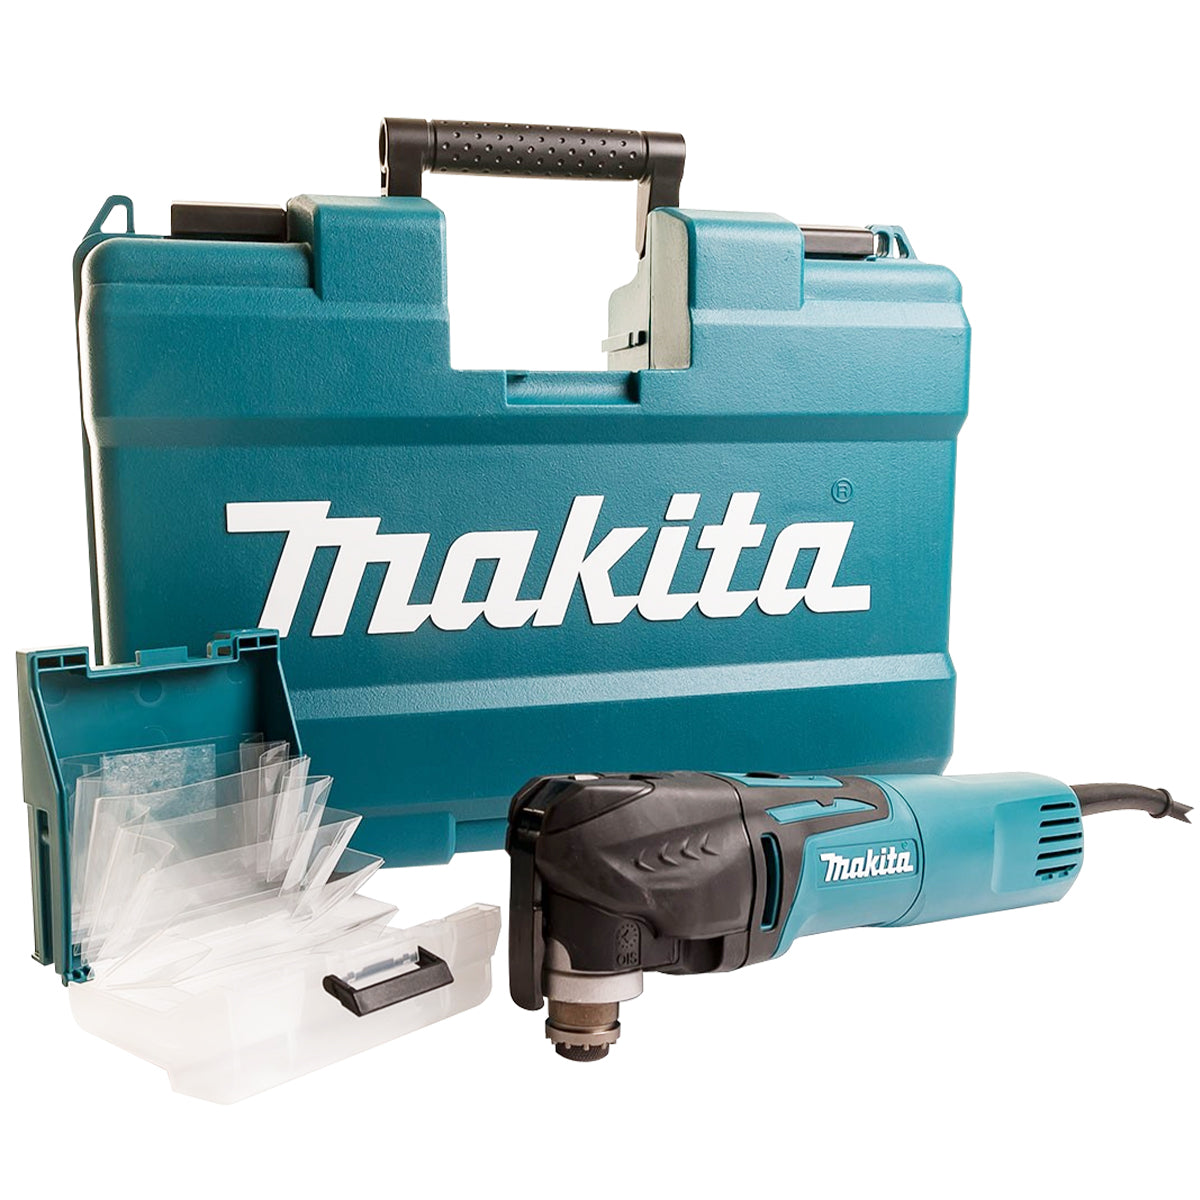 Makita TM3010CK 240V Oscillating Multi-Tool Quick Change Blade With 39 Piece Accessories Set